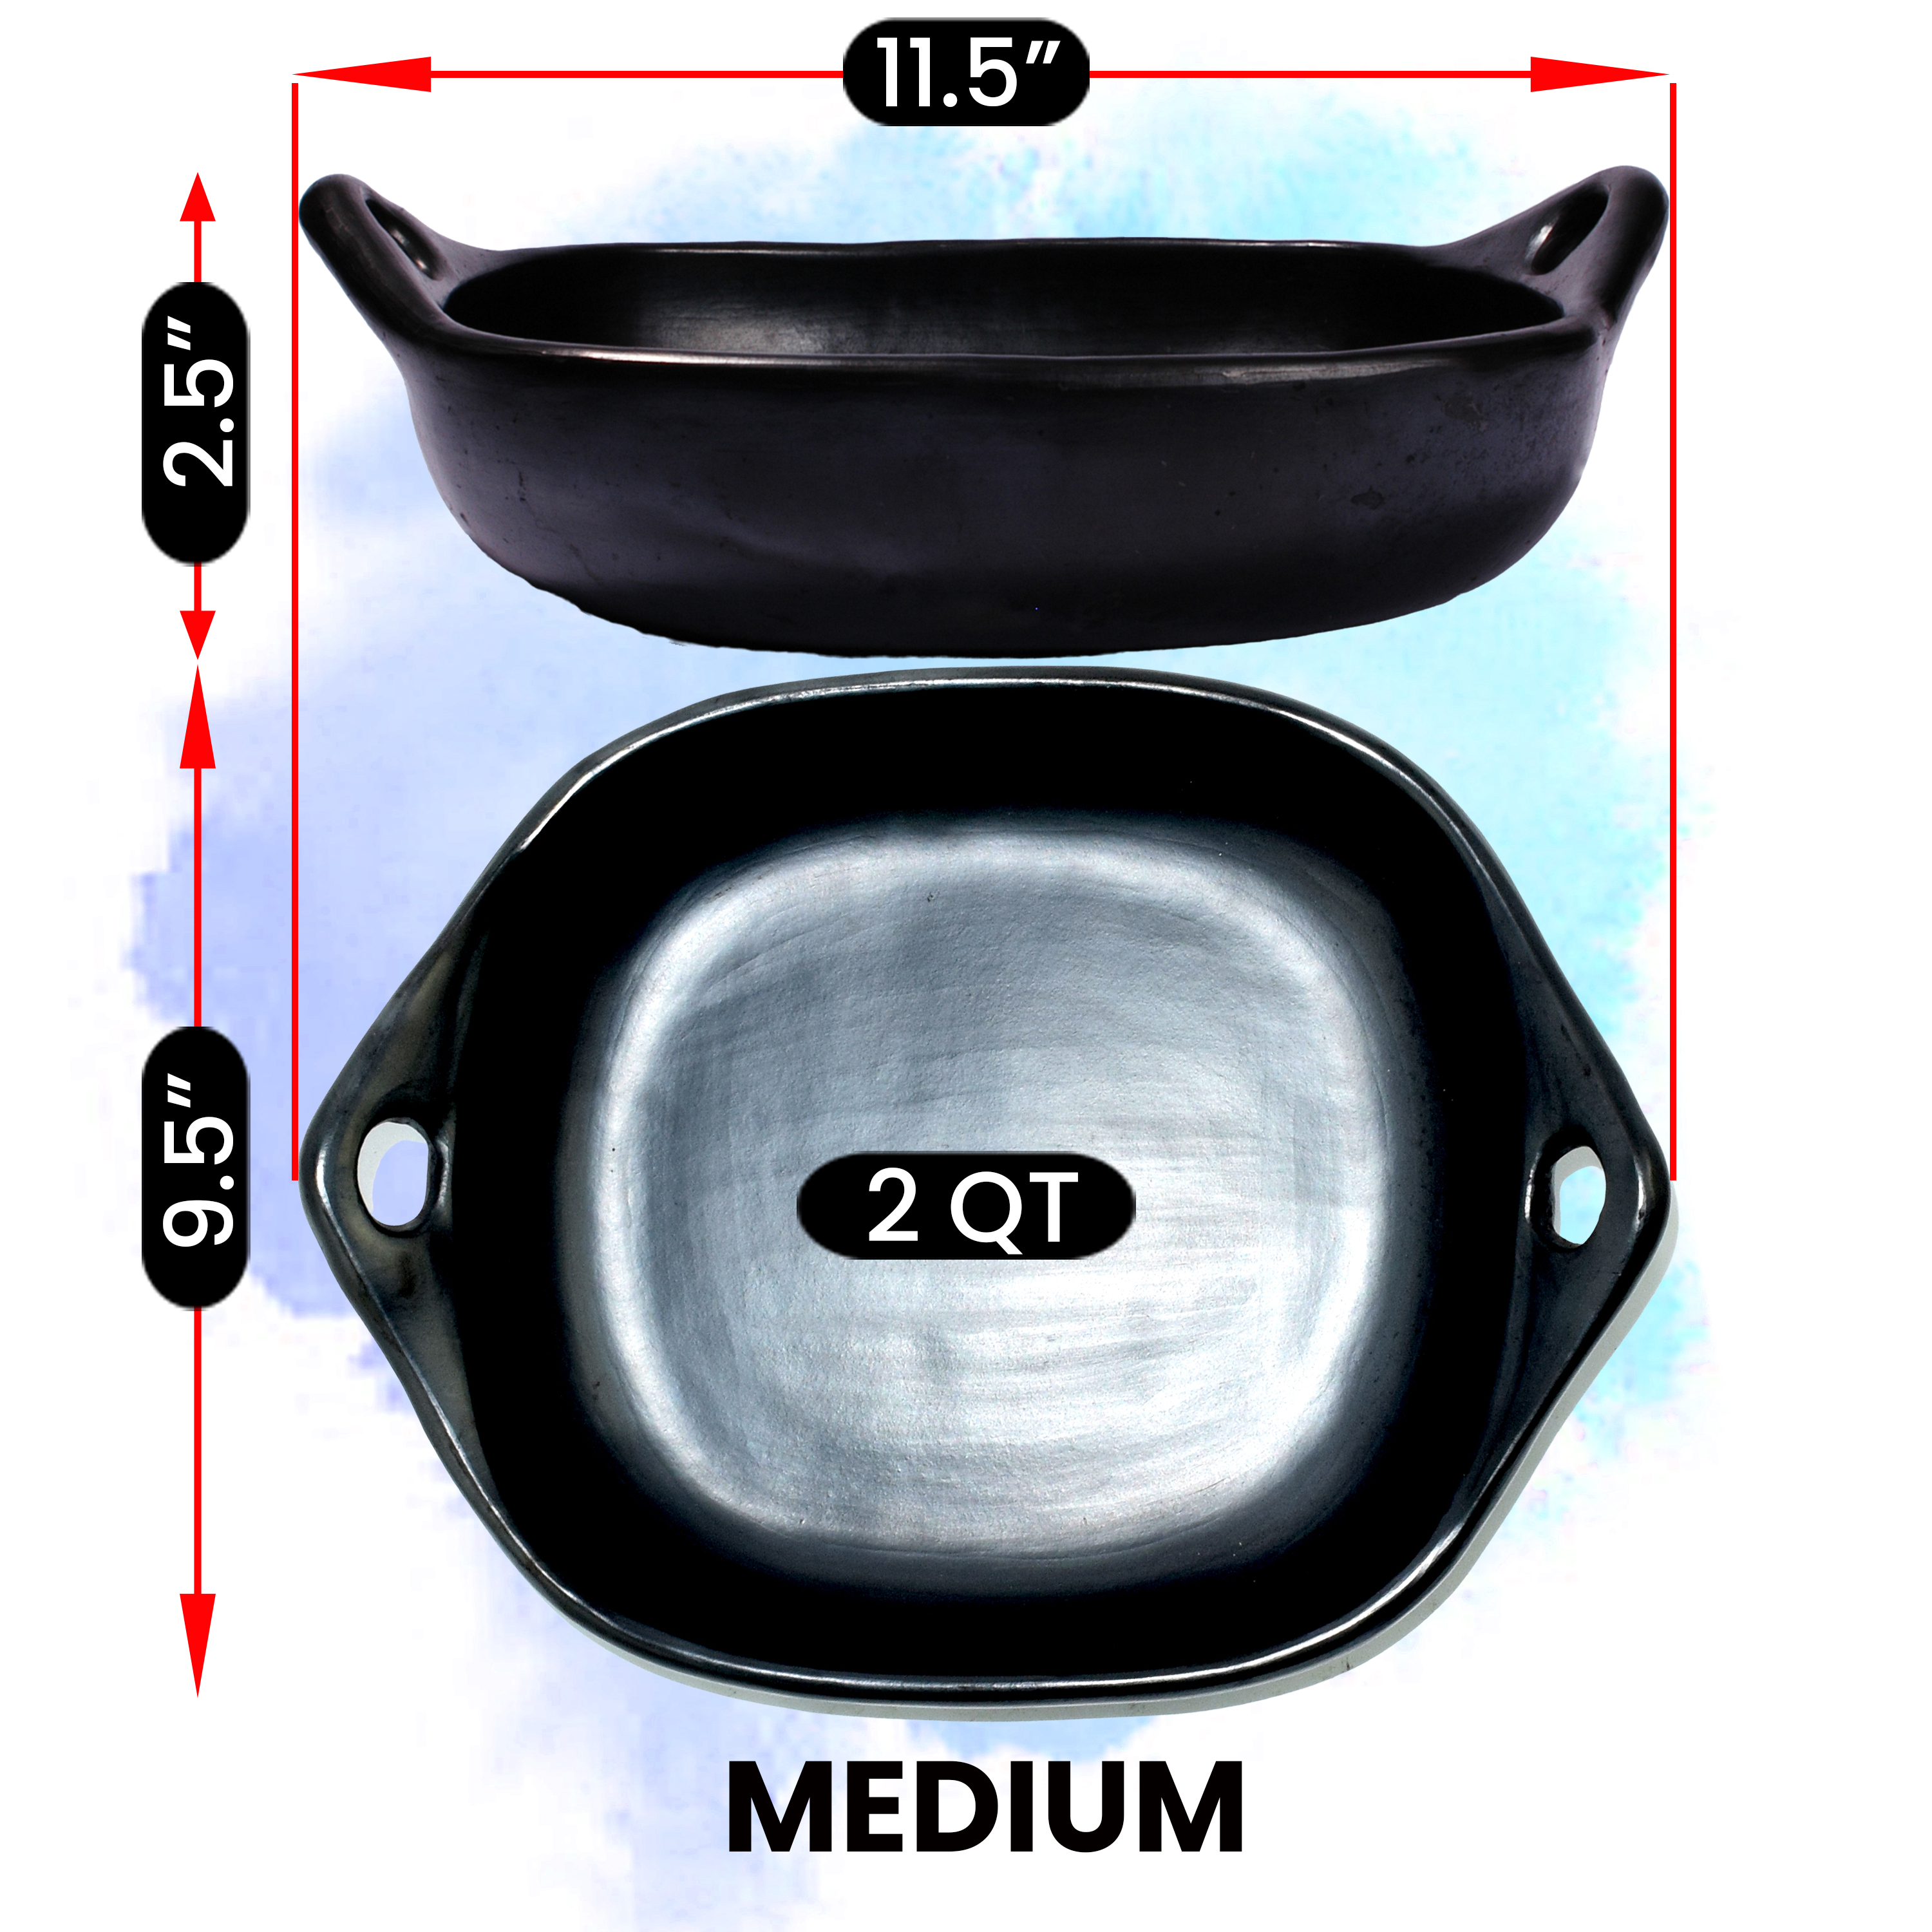 https://ancientcookware.com/images/stories/virtuemart/product/col_3029_12_Large_with_measurements.jpg